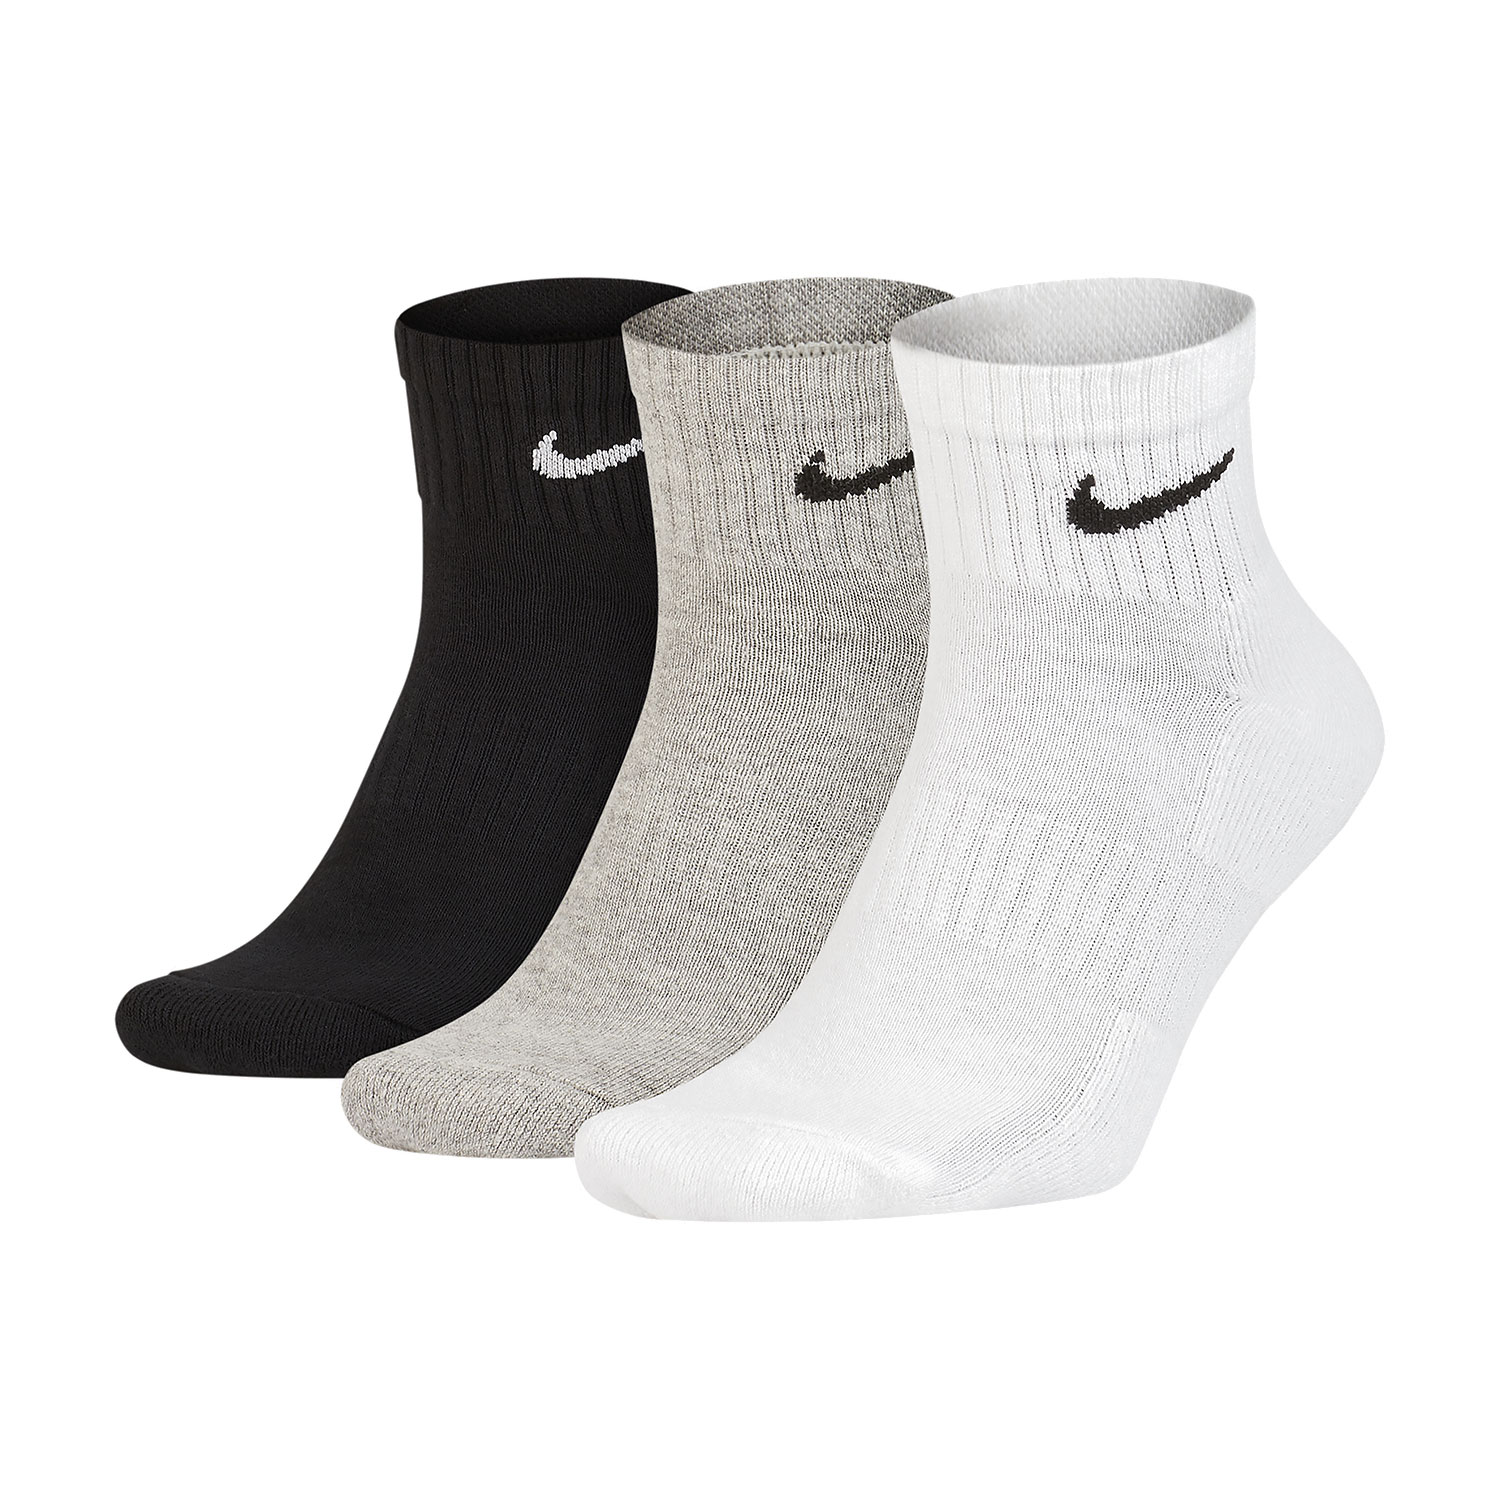 Nike Everyday Cushion Ankle x 3 Calze da Running Multi Color